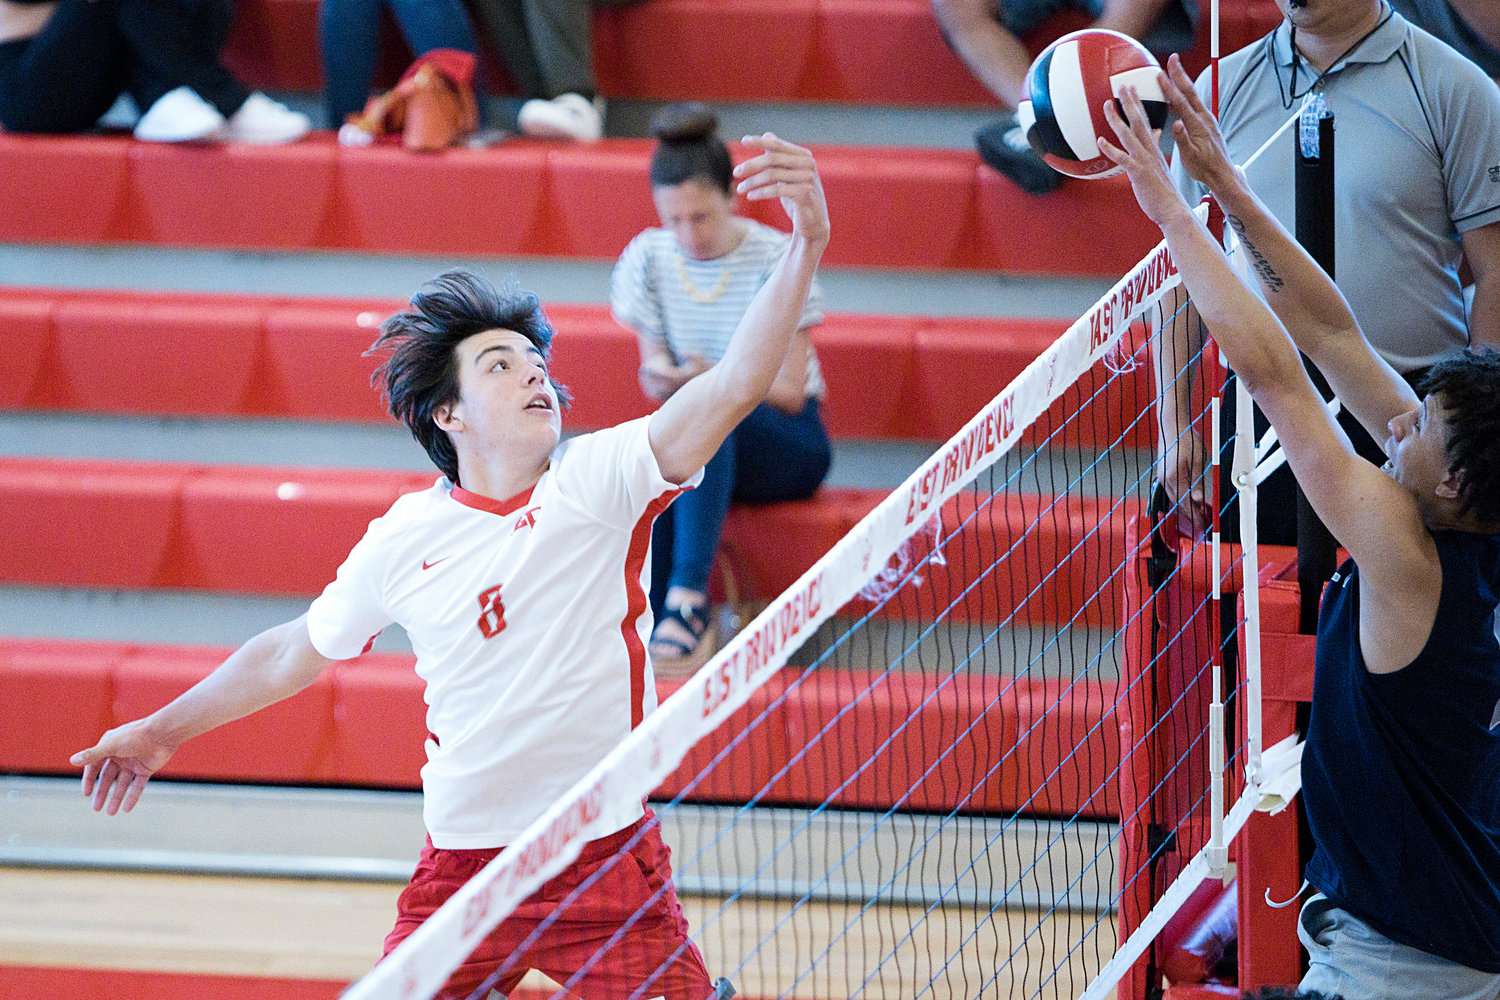 East Providence High School’s Brett Schwab tips the ball over the net while competing against Westerly in the Division II boys' volleyball semifinals, Wednesday, June 8.